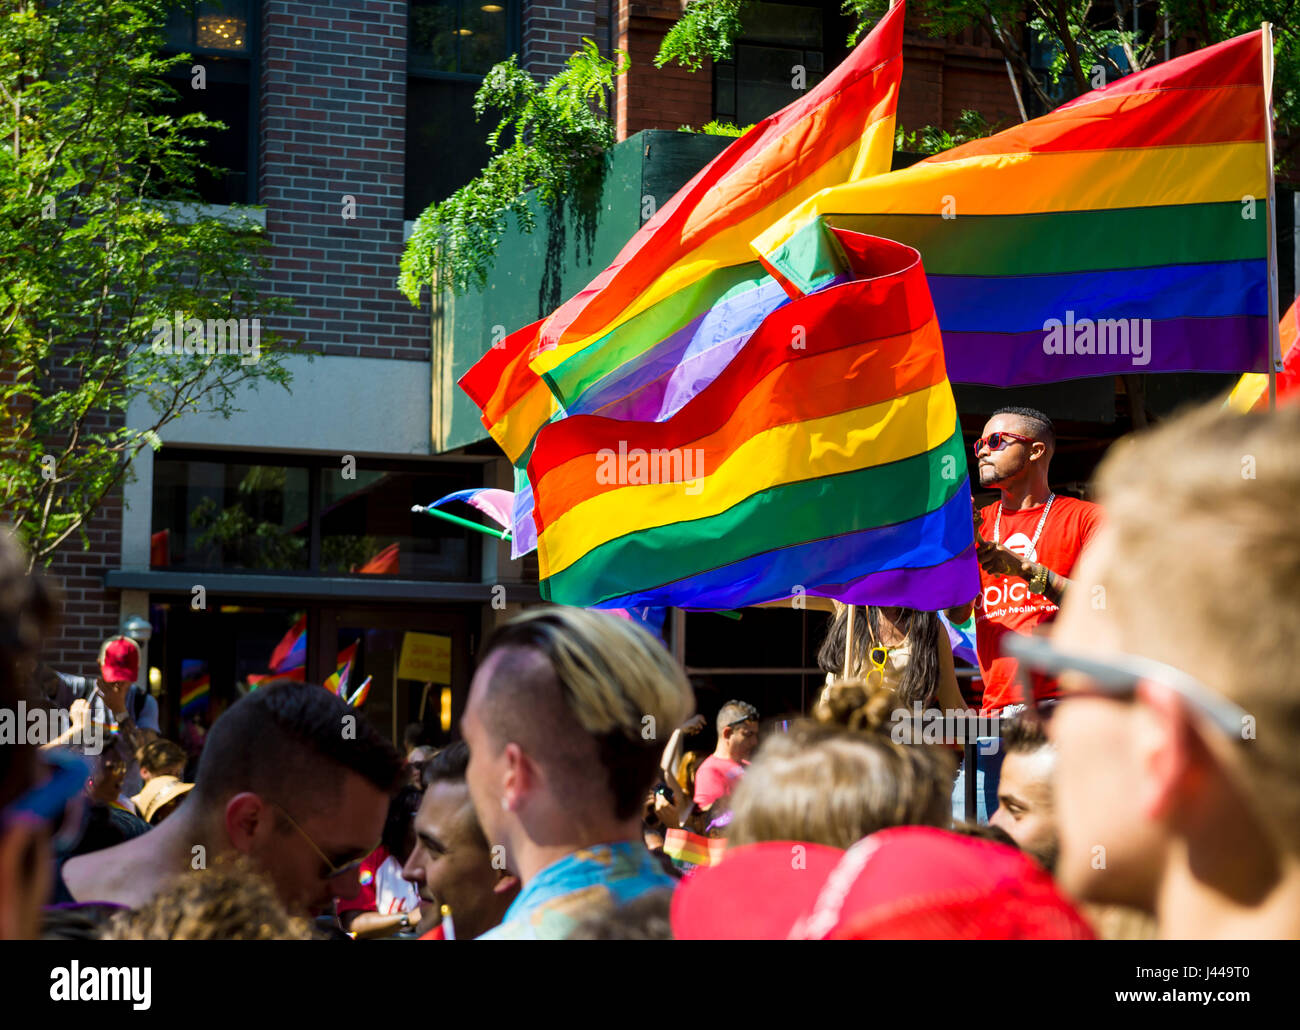 NEW YORK CITY - JUNE 28, 2015: Supporters wave rainbows flags on the sidelines of the annual Pride Parade as it passes through Greenwich Village. Stock Photo